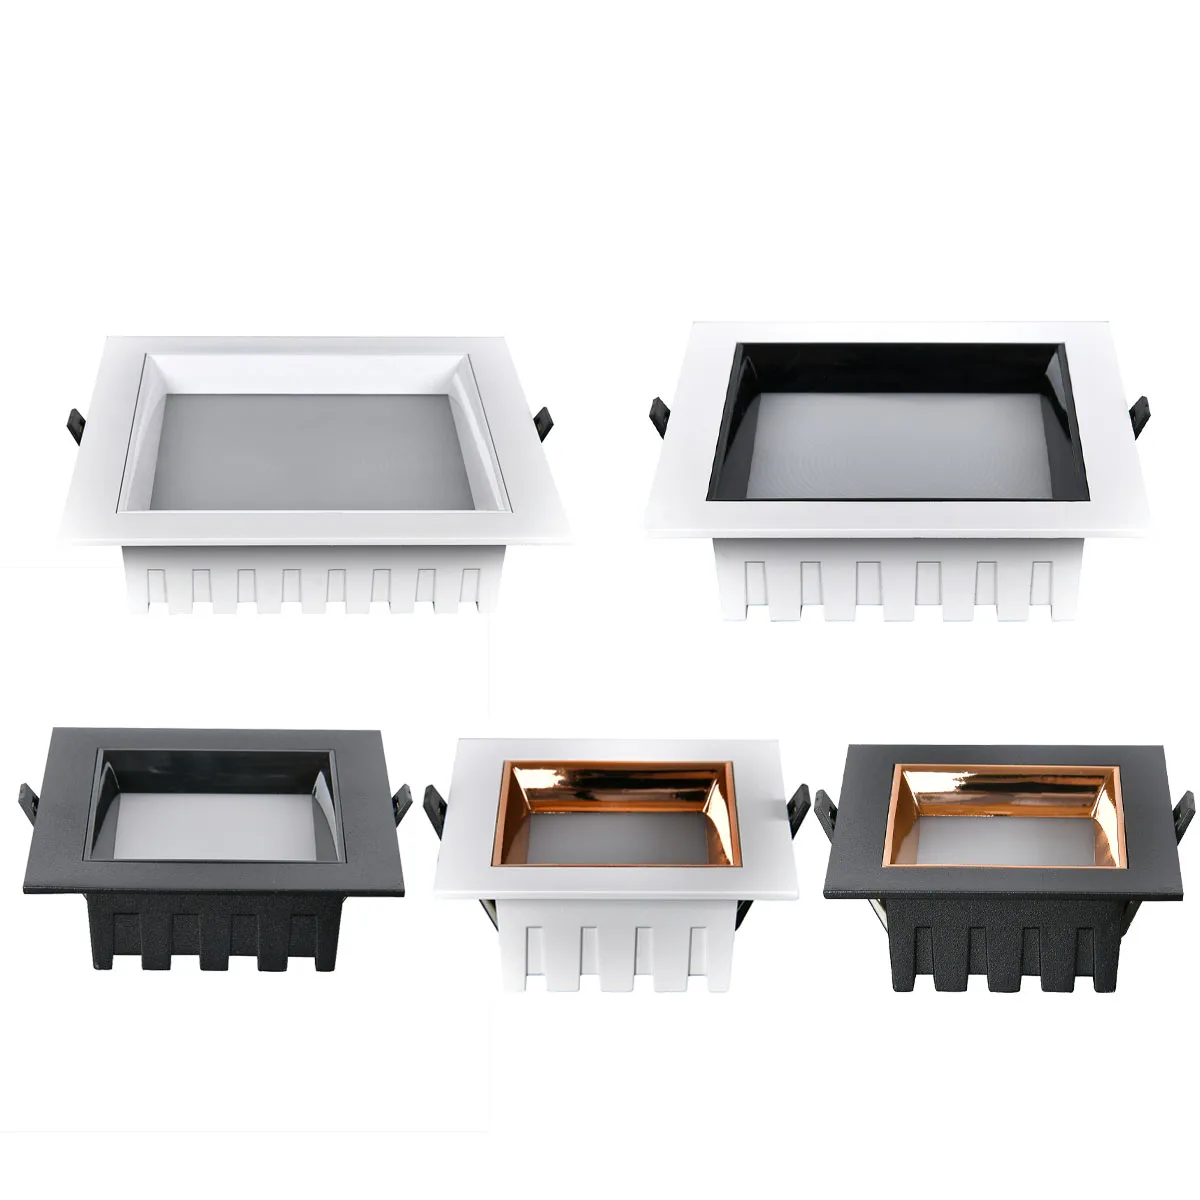 

Dimmable Square Deep Anti Glare LED panel recessed LED downlight 7W 9W 12W 15W 18W 24W LED ceiling light AC85-265V